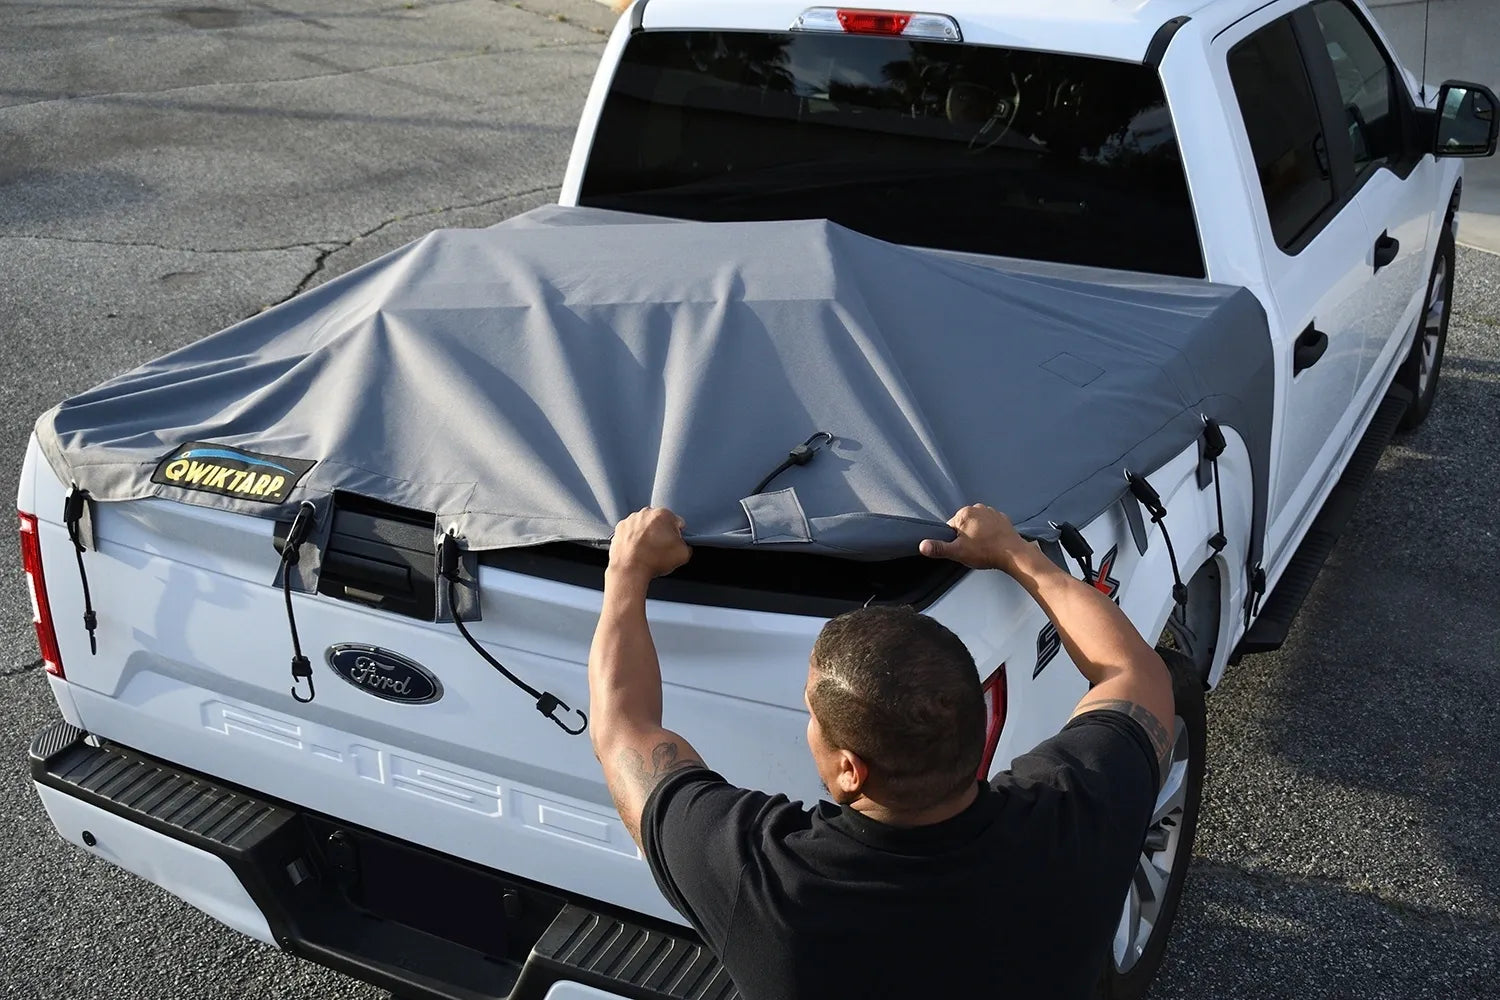 Truck Bed Covers, Pickup Truck Bed Cover & Tarp